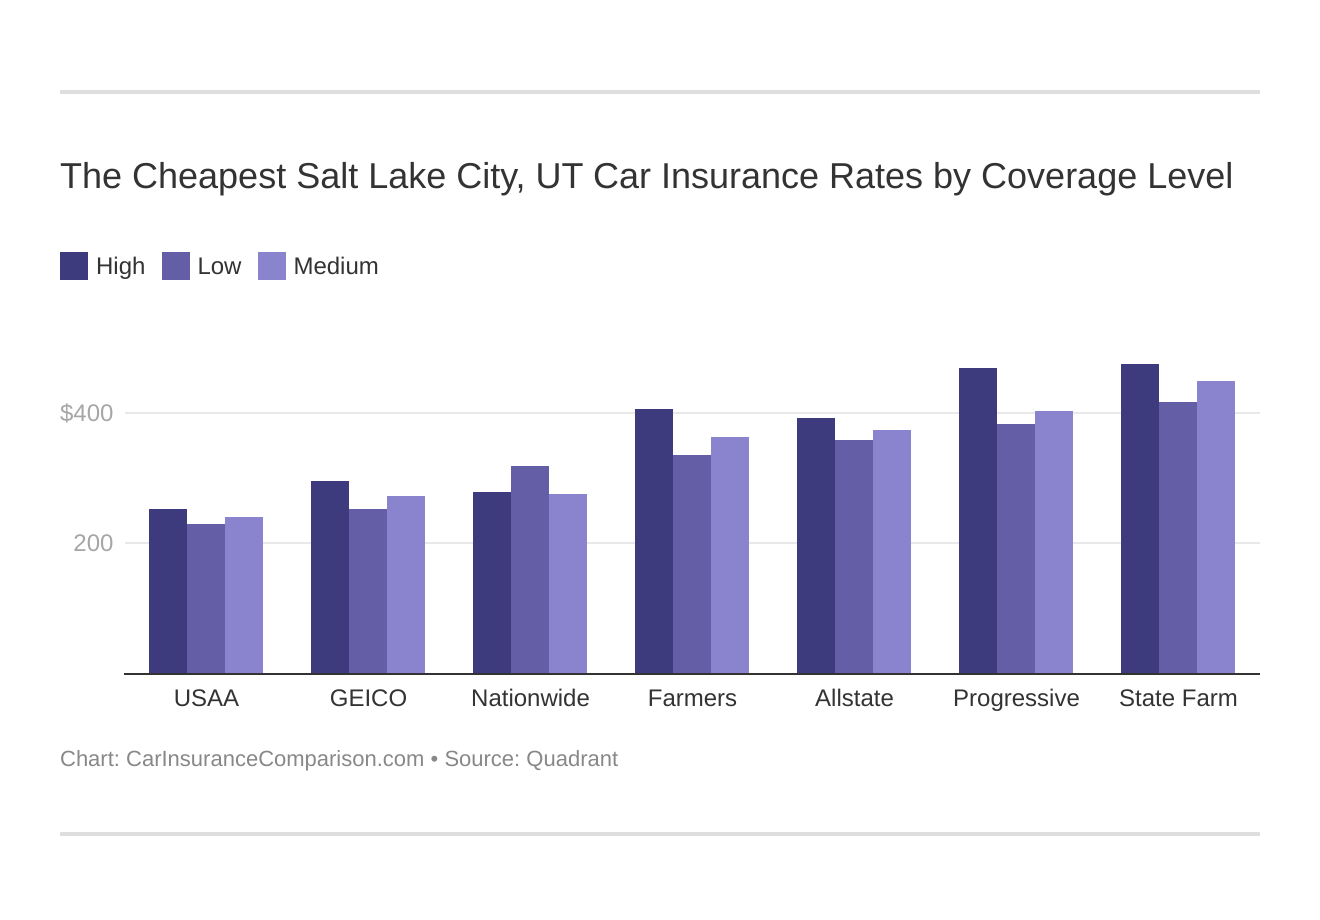 The Cheapest Salt Lake City, UT Car Insurance Rates by Coverage Level